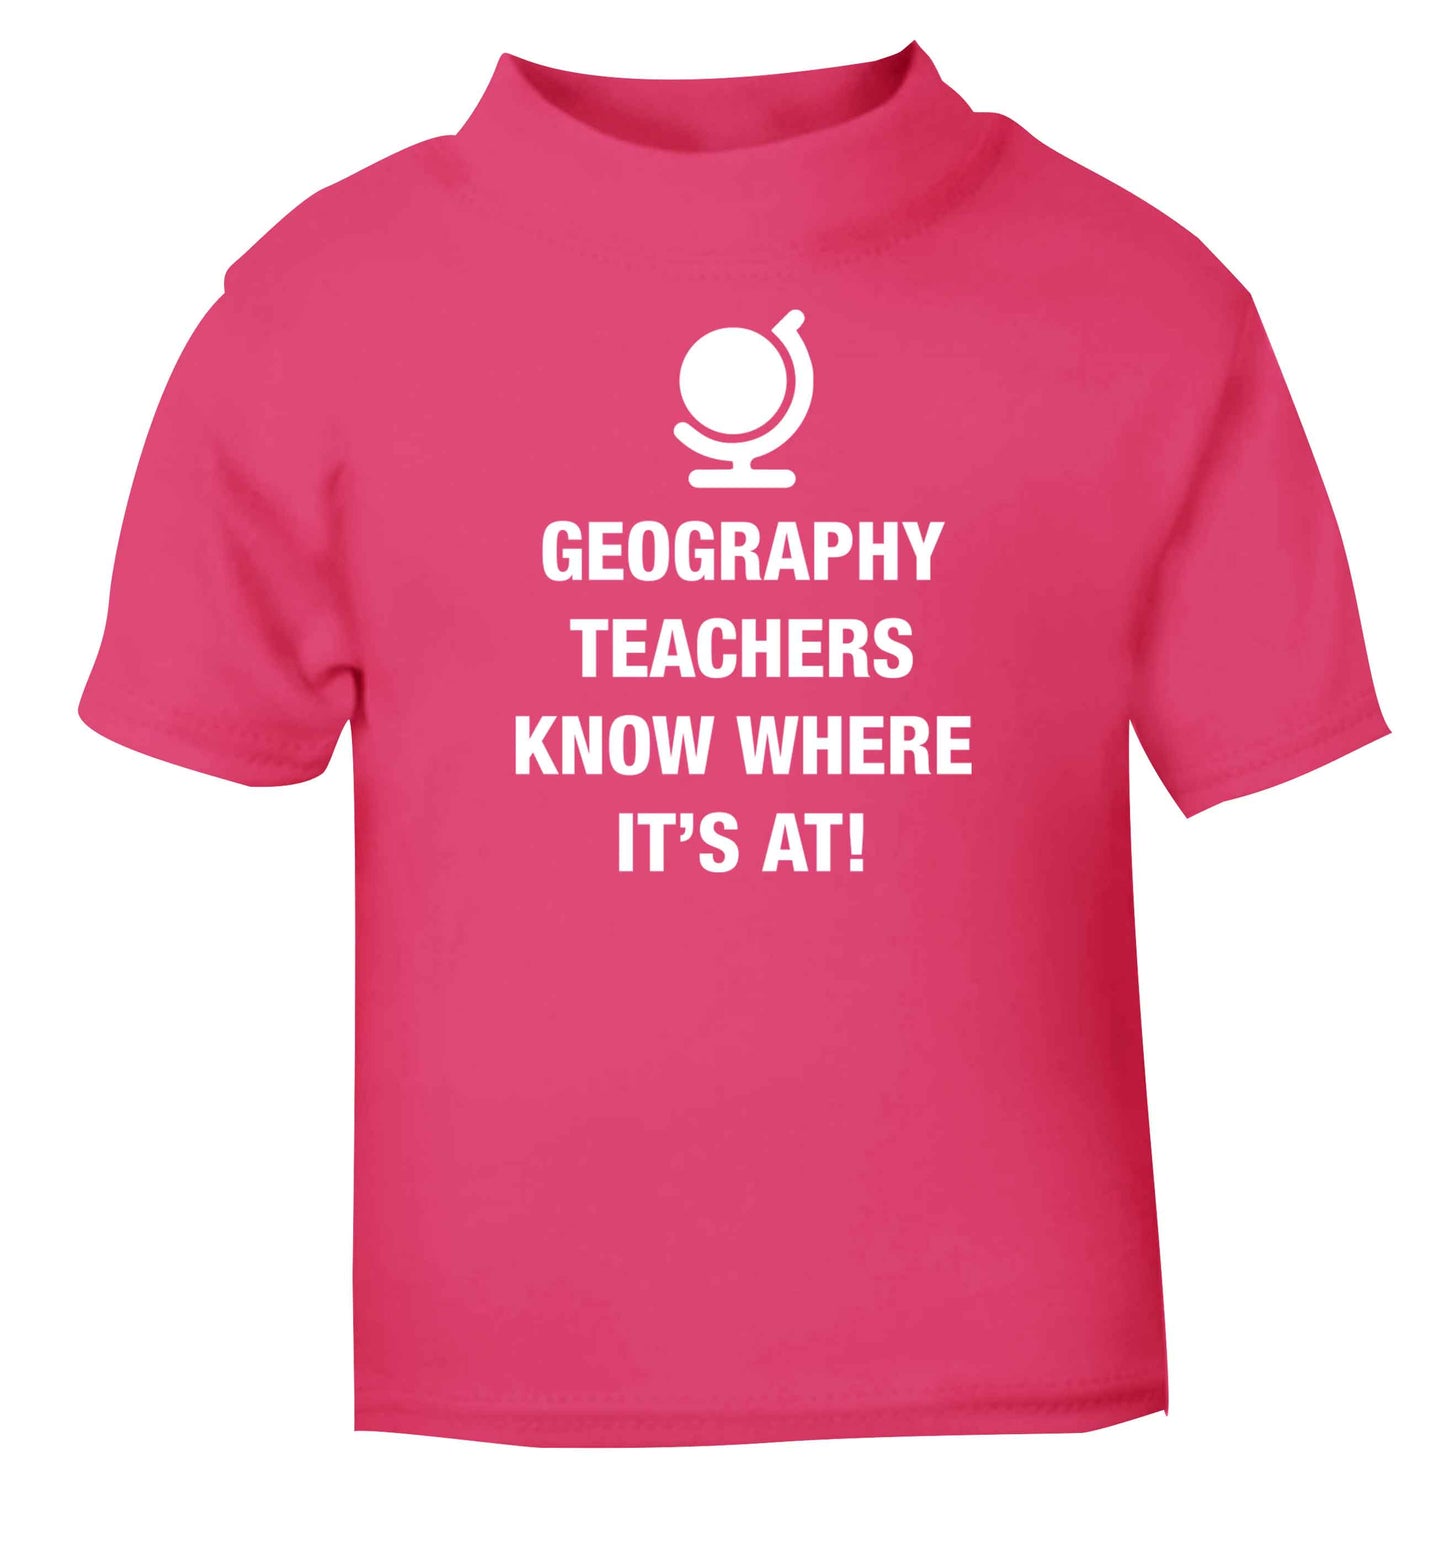 Geography teachers know where it's at pink baby toddler Tshirt 2 Years